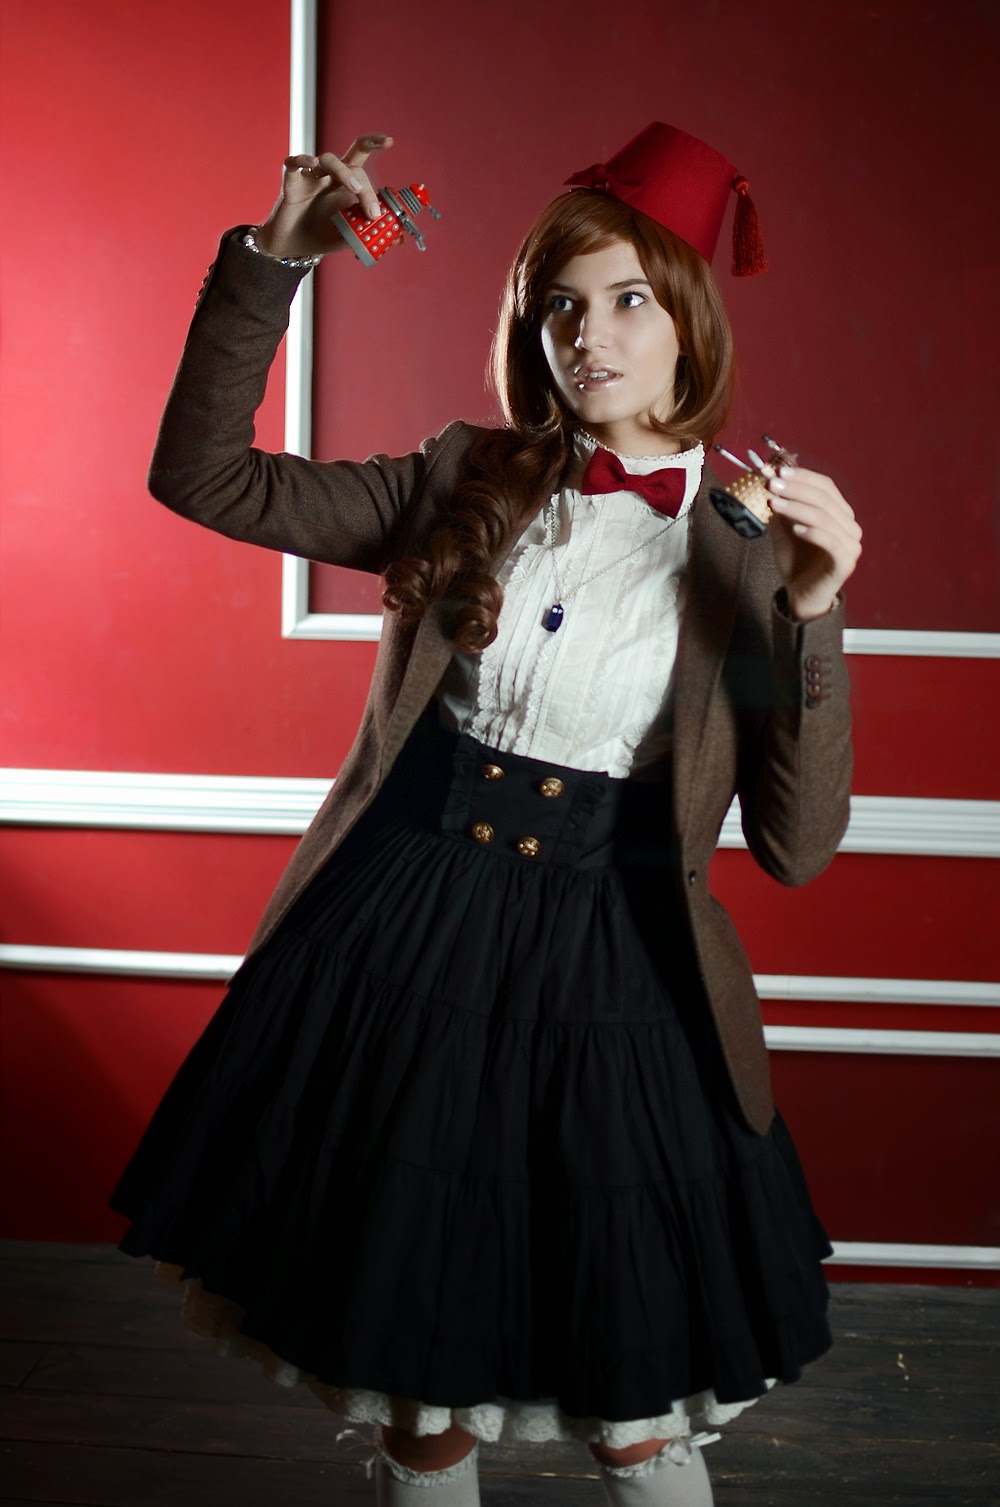 11th doctor stetson cosplay